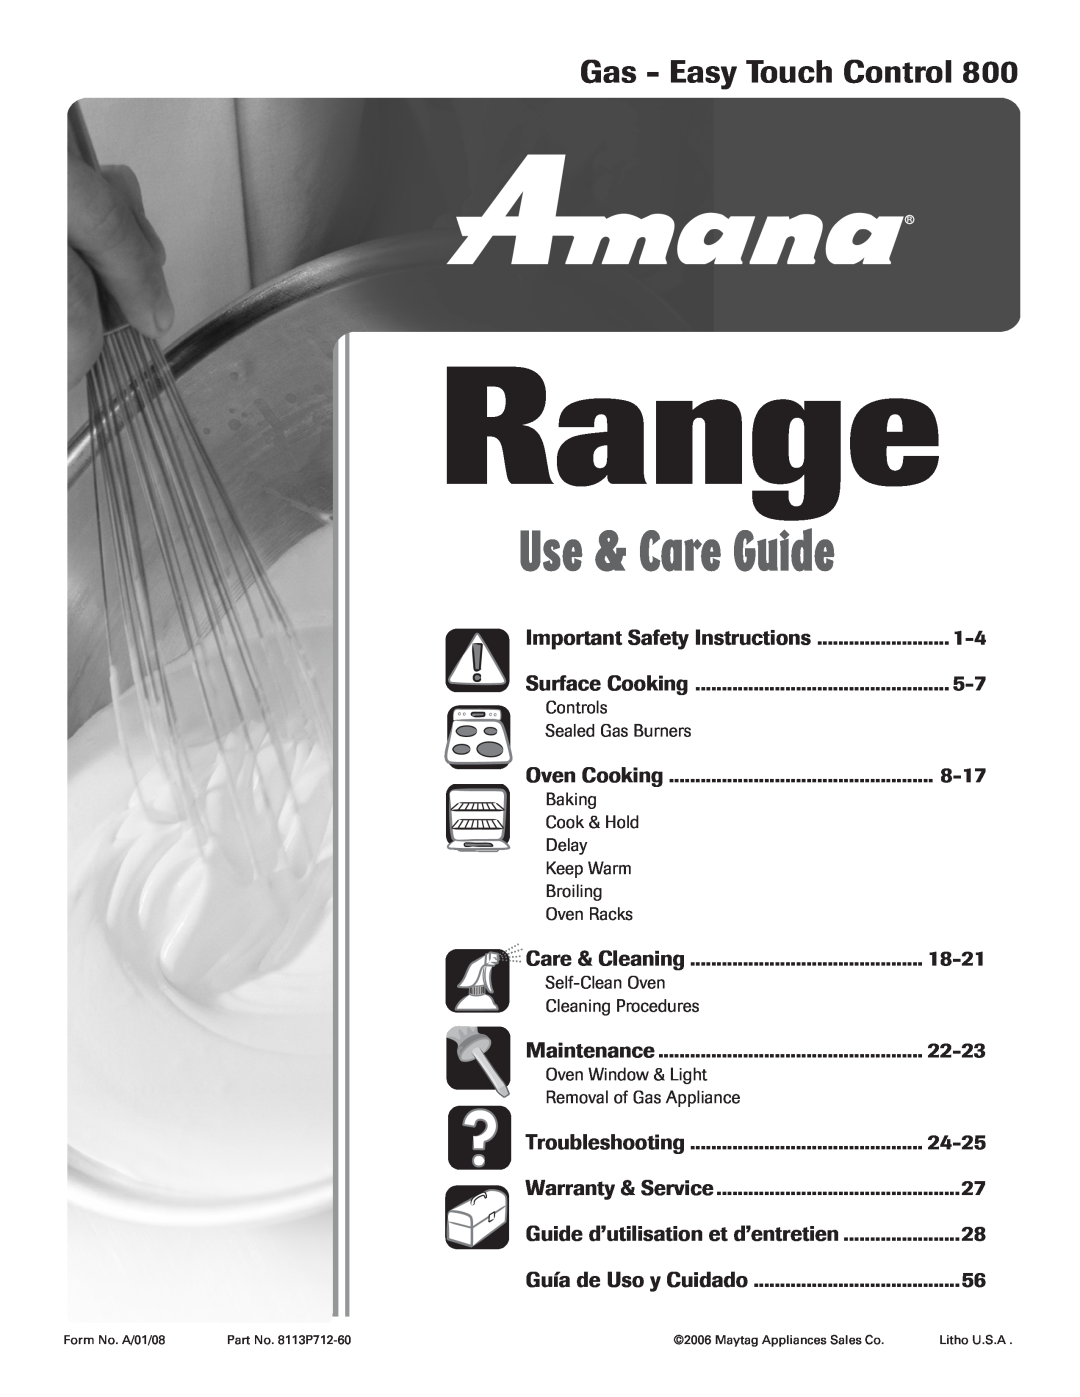 Amana AGR5835QDW important safety instructions Range, Gas - Easy Touch Control, Use & Care Guide 